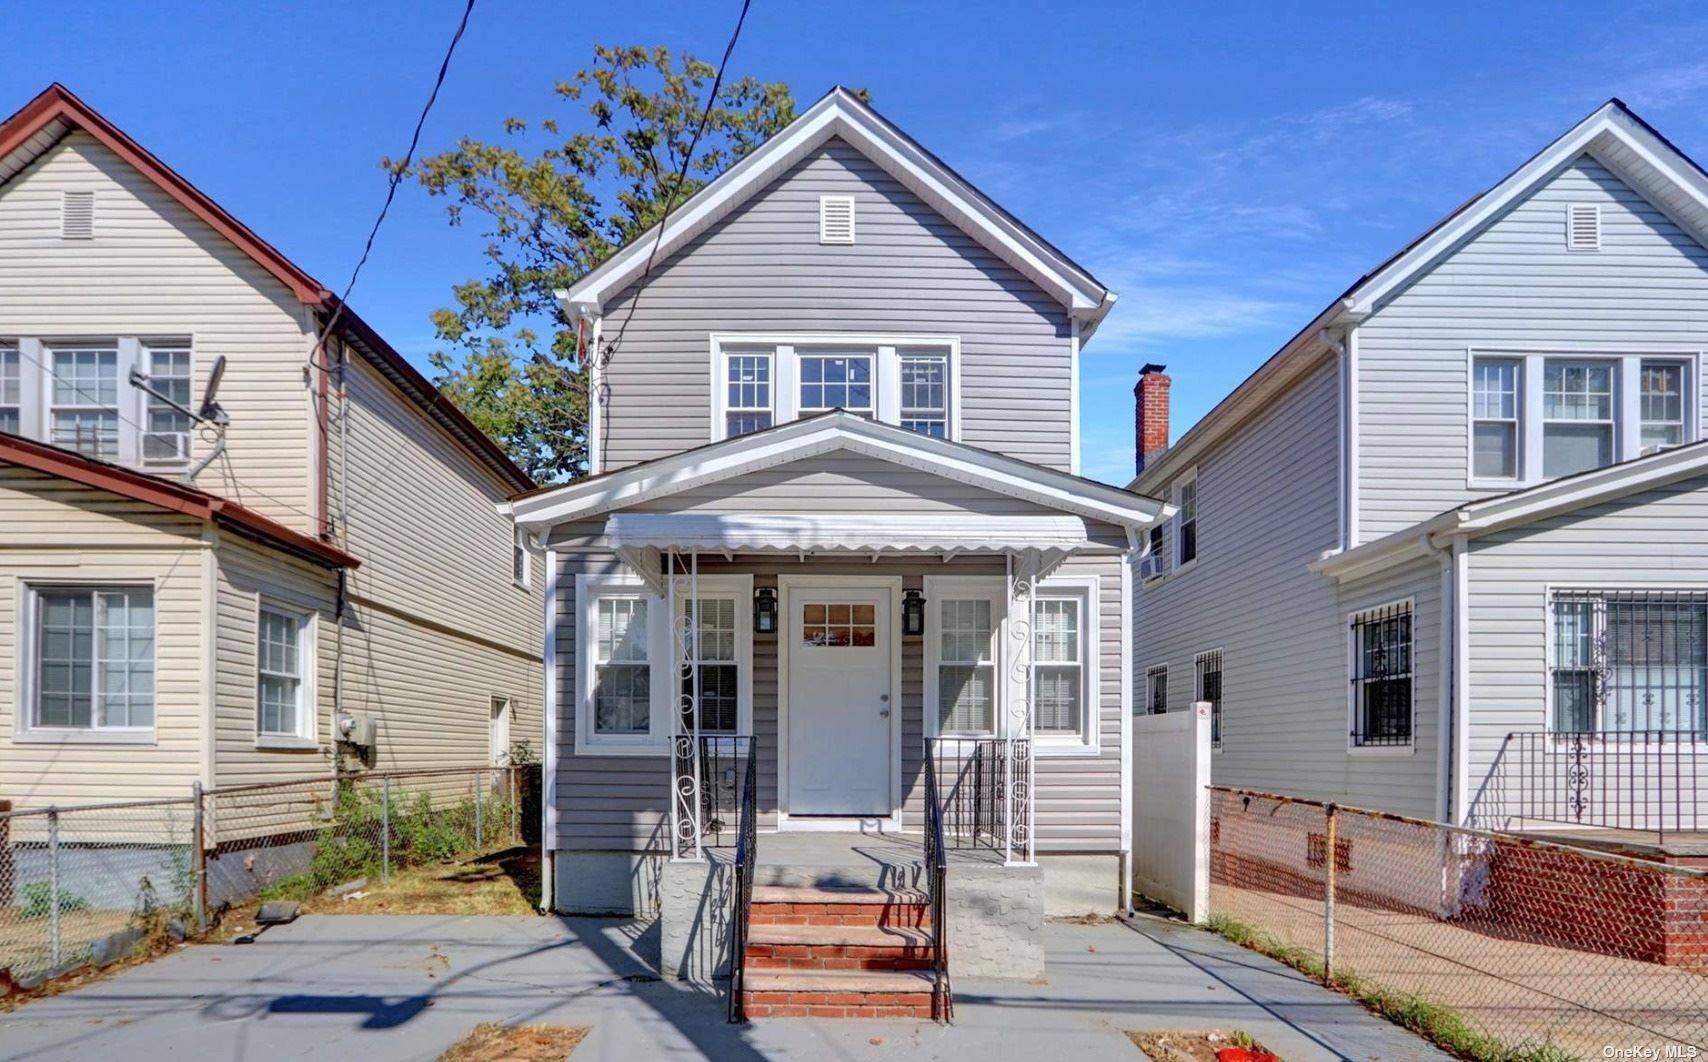 Fully Renovated Single Family home in sought after Queens neighborhood.